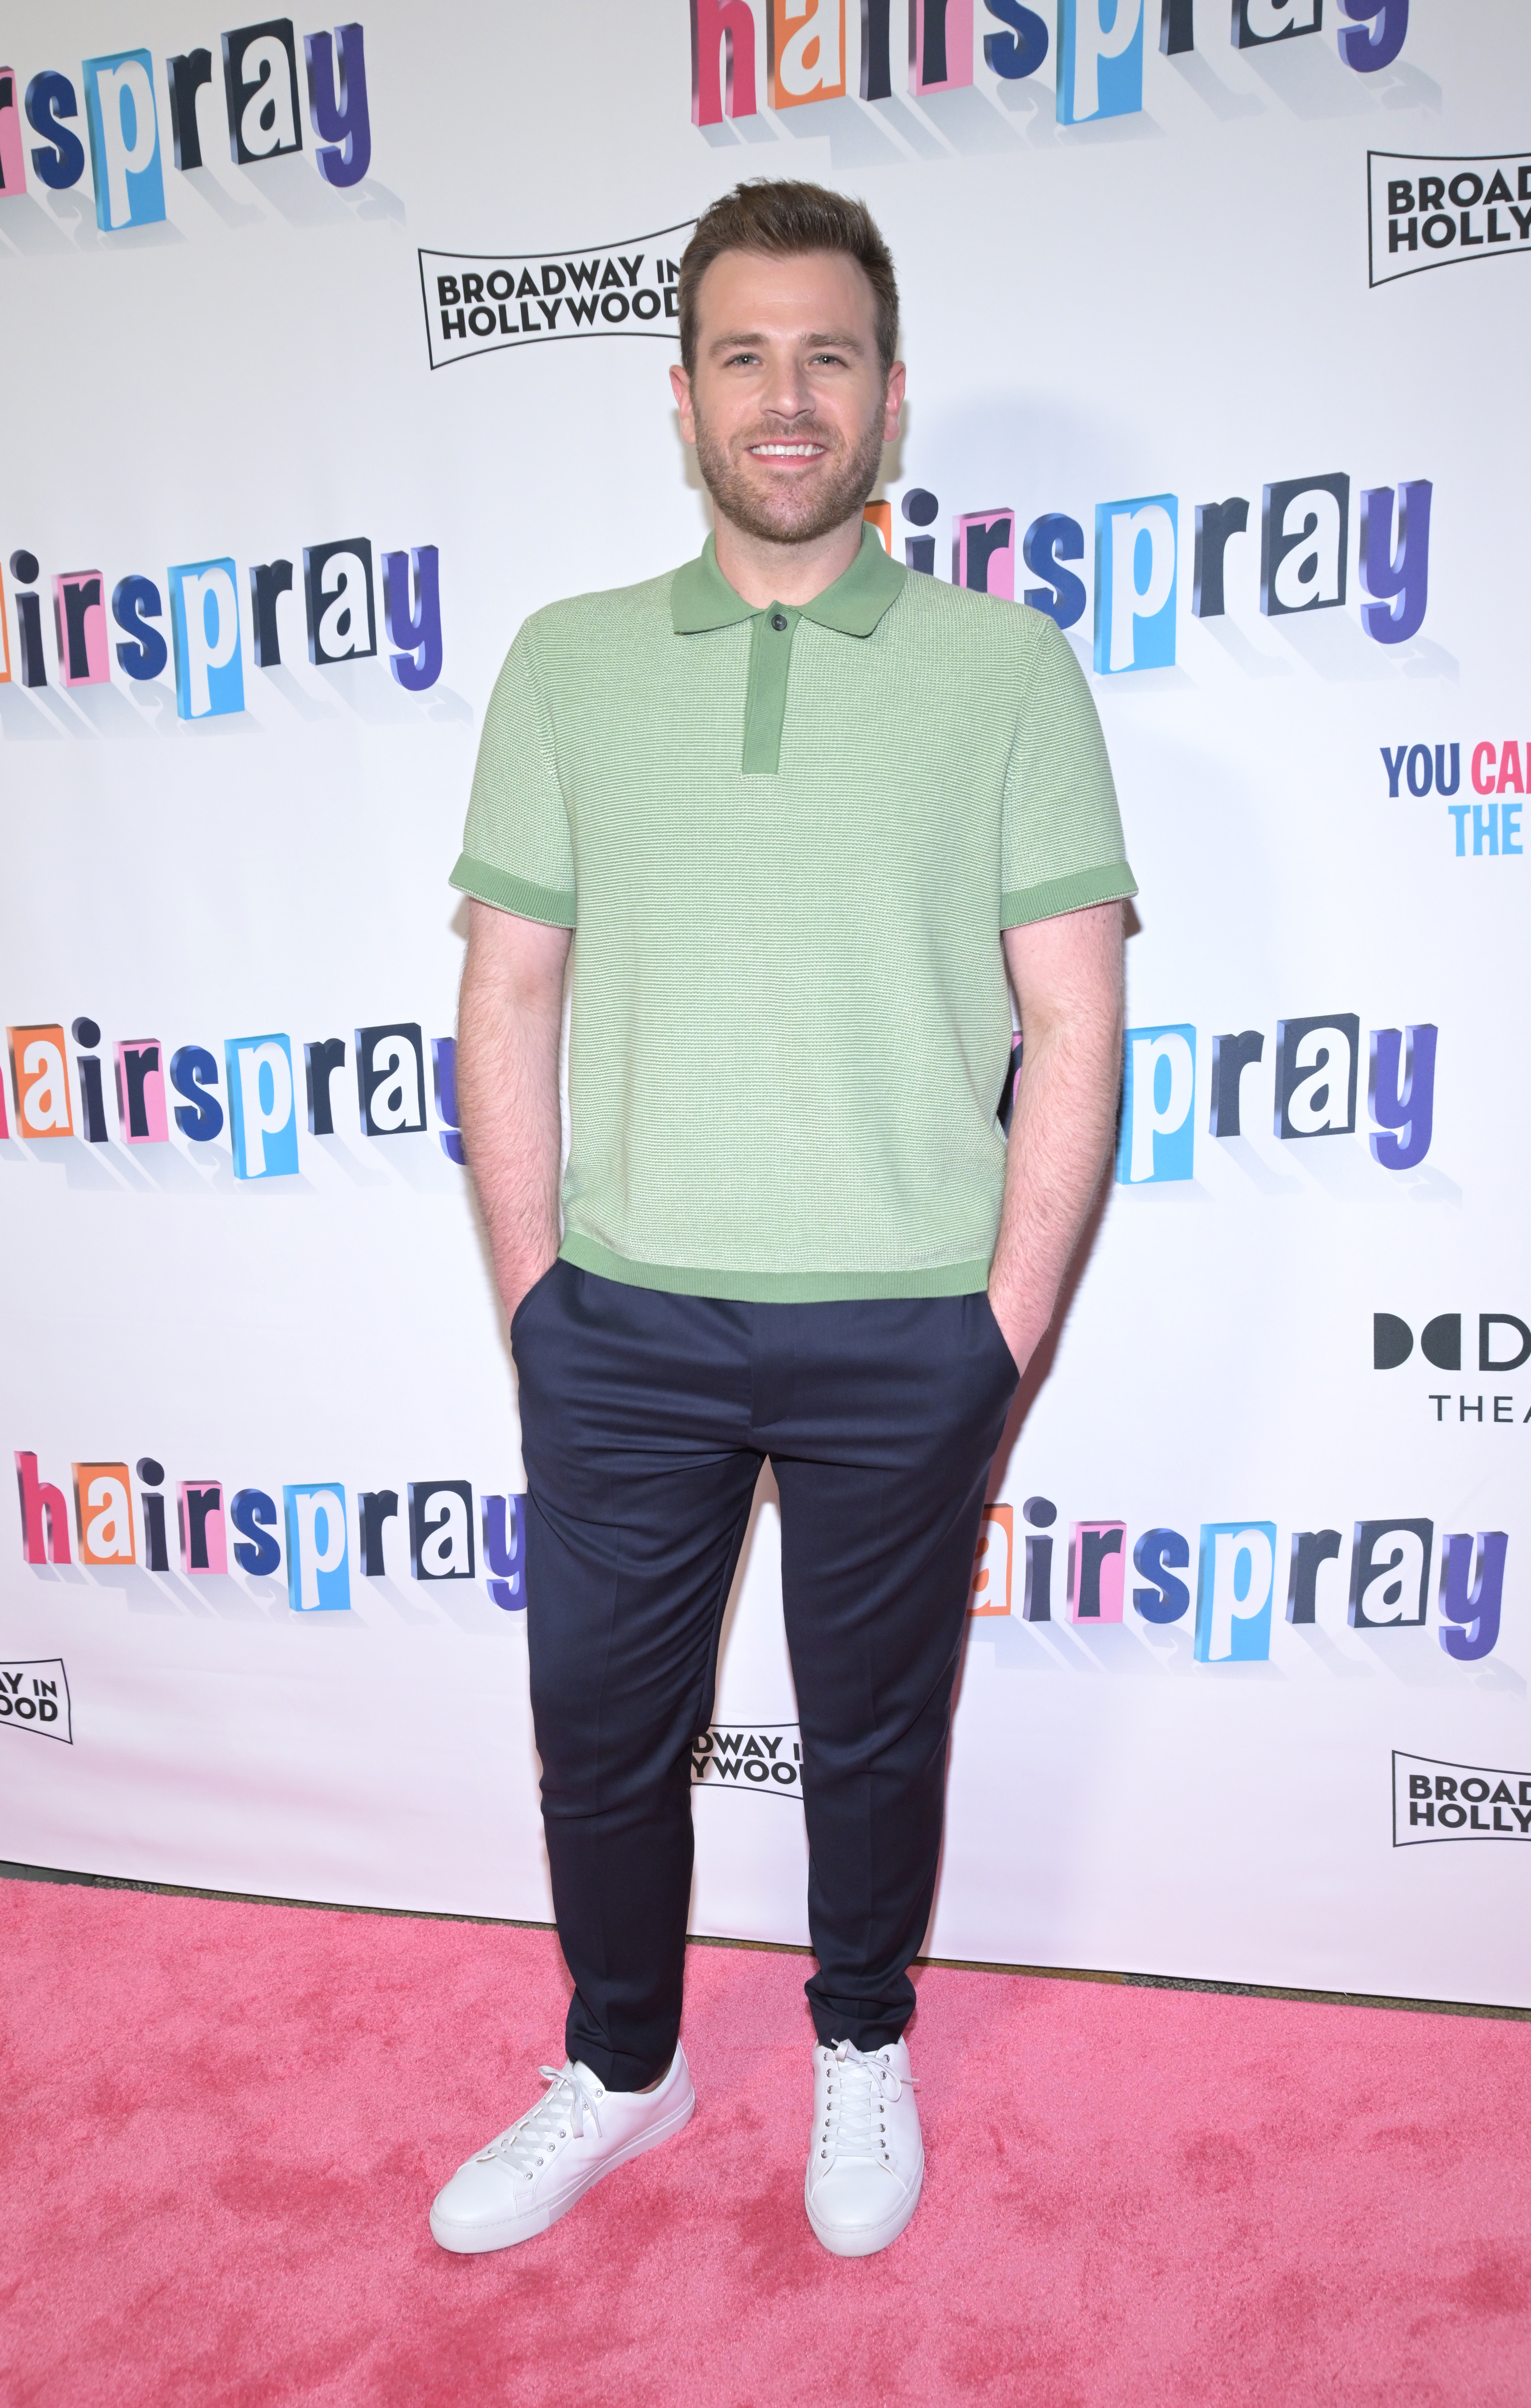 Scott Evans on the red carpet at an event for the hairspray